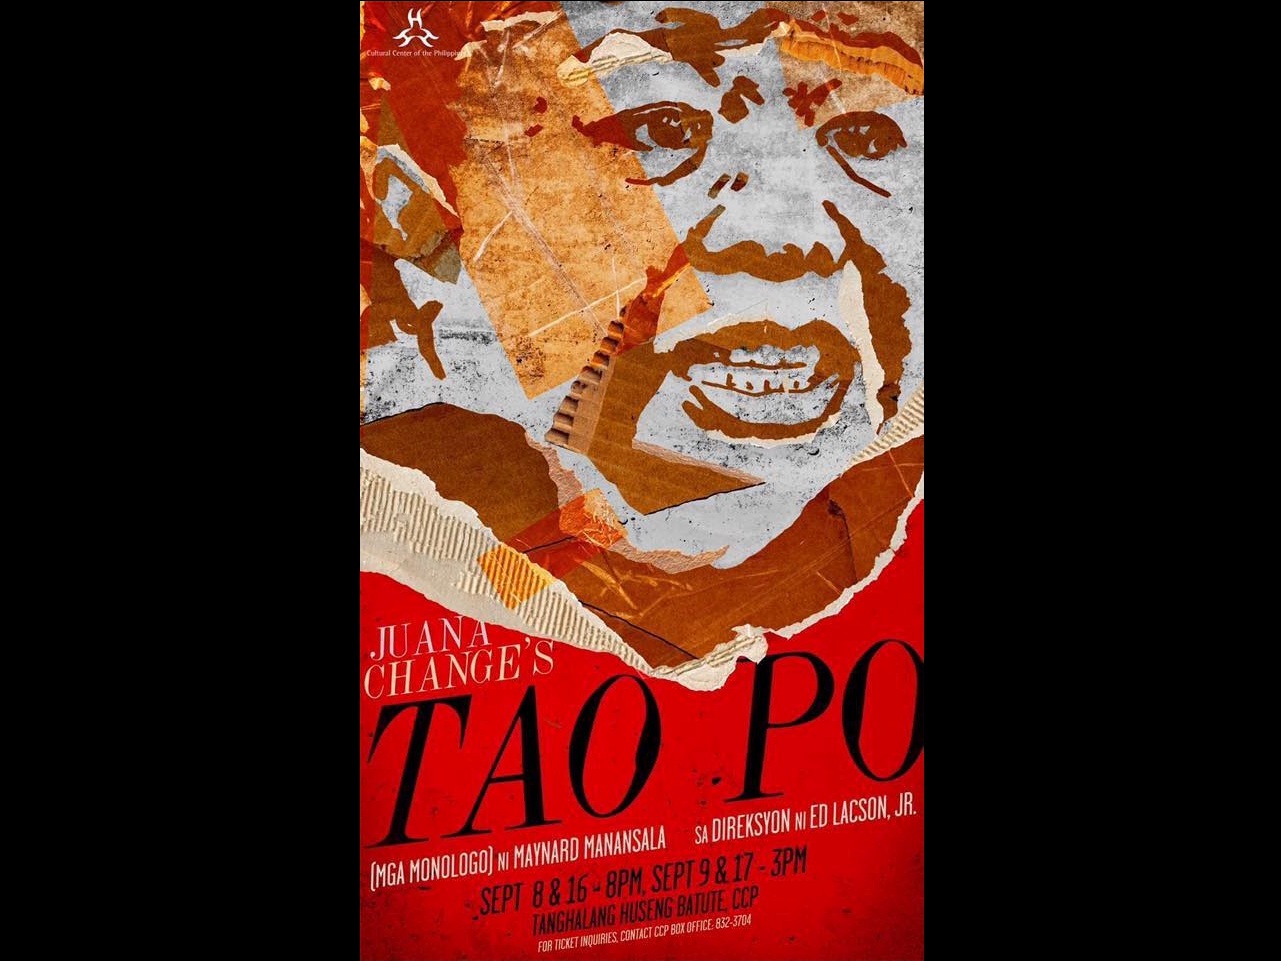 Mae Paner in the monologue play "Tao Po"